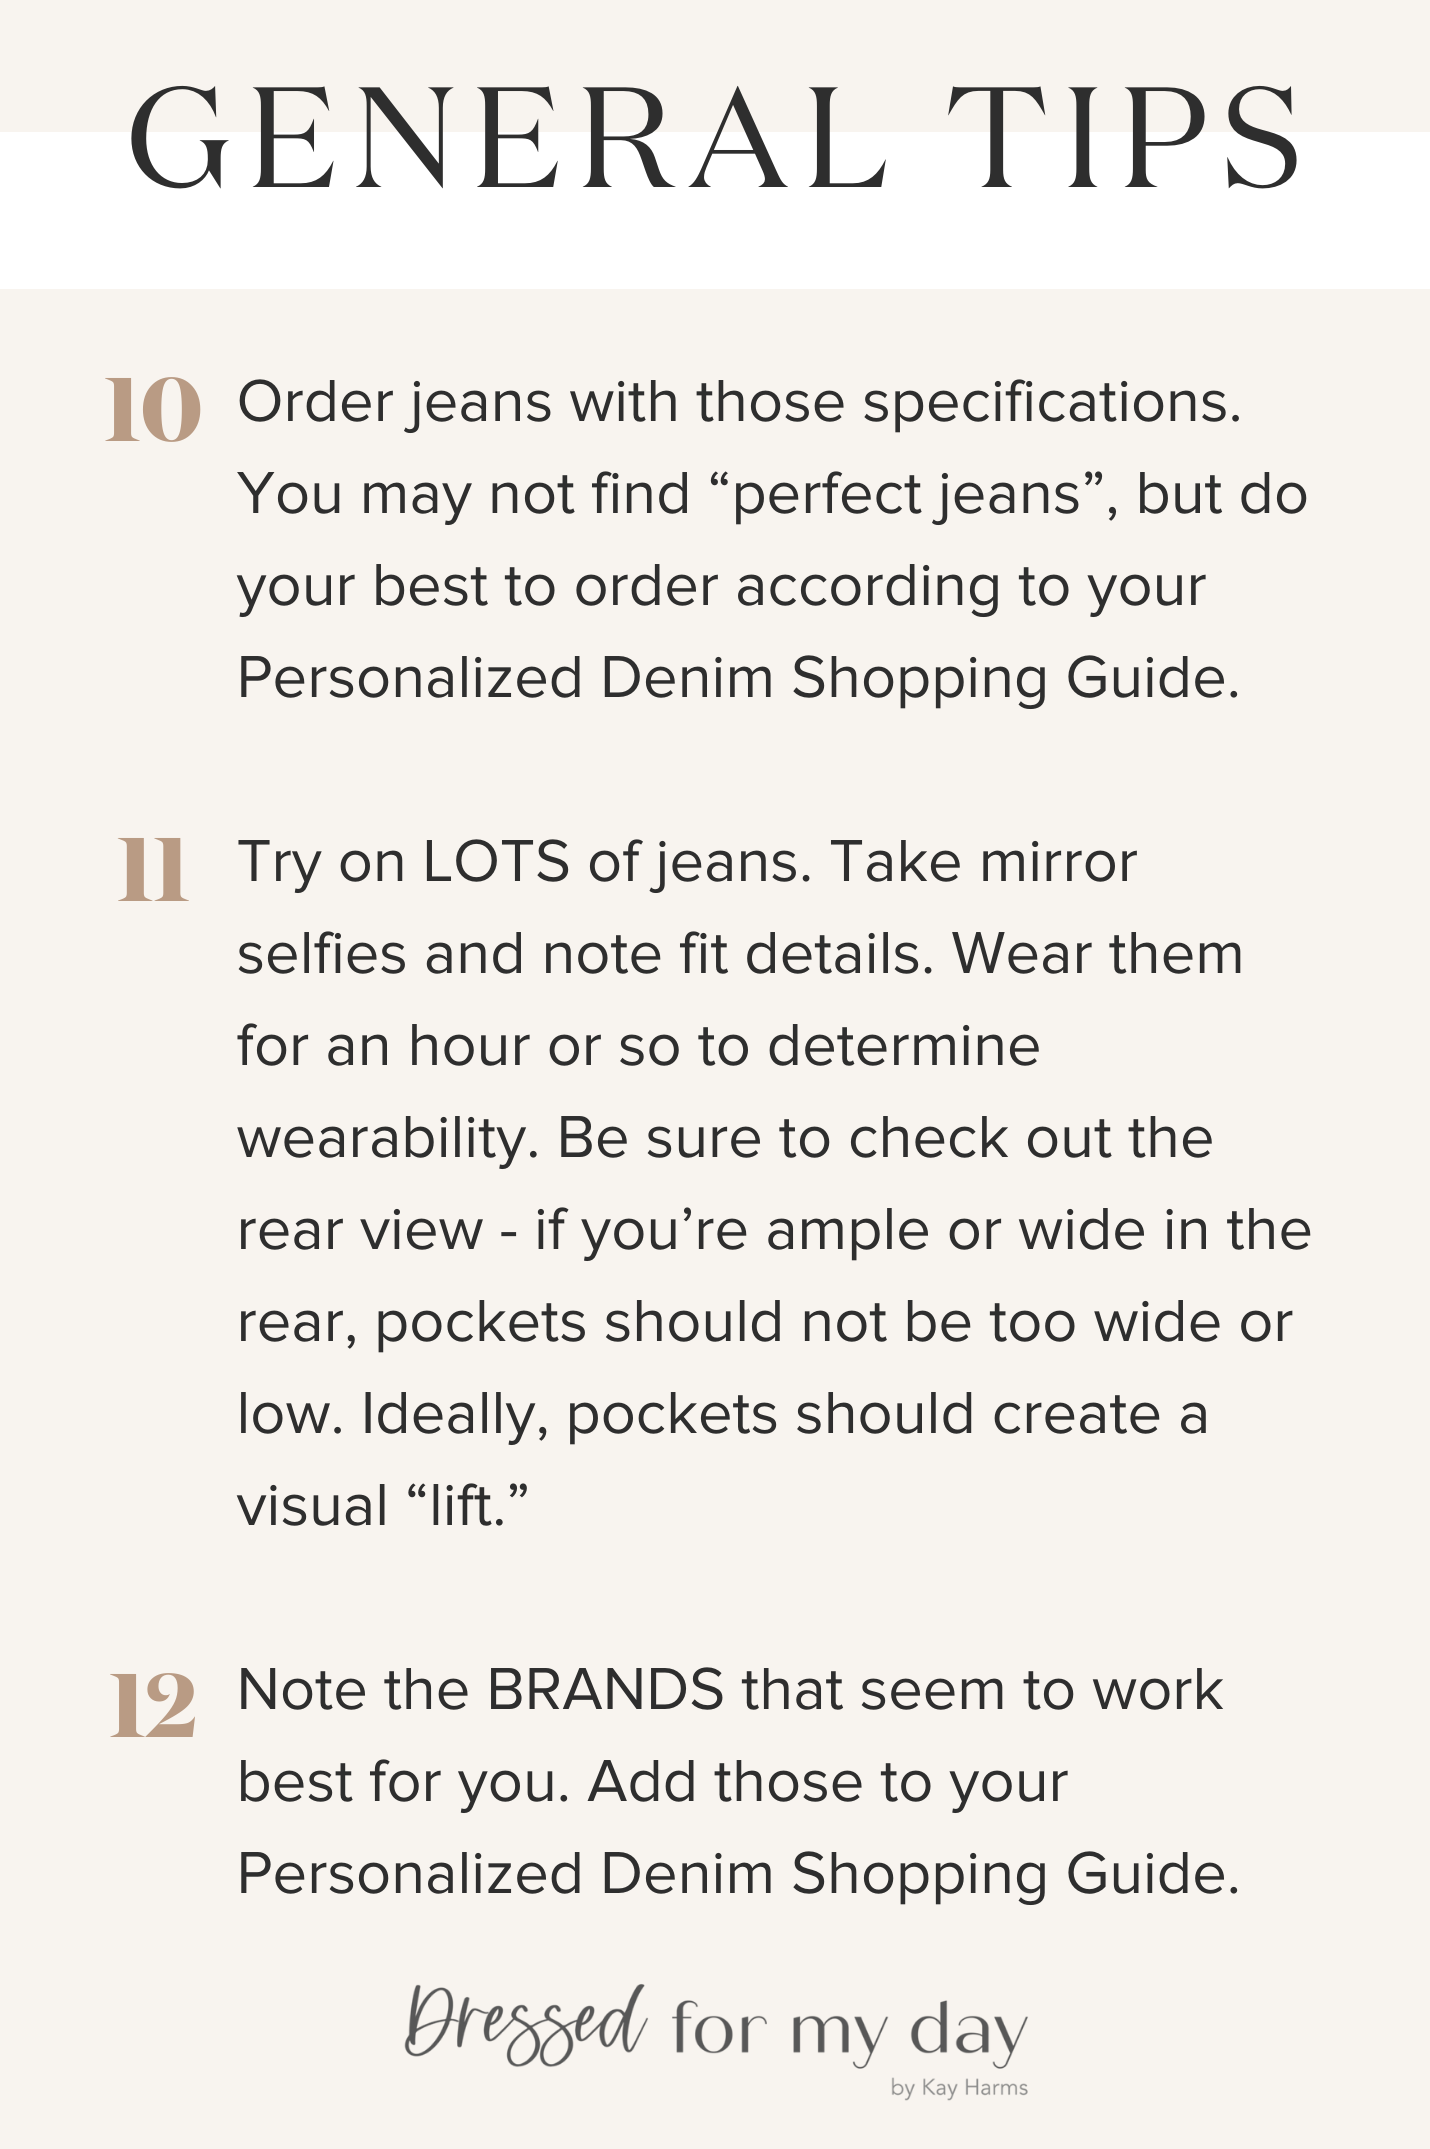 General Tips for Finding the Right Jeans